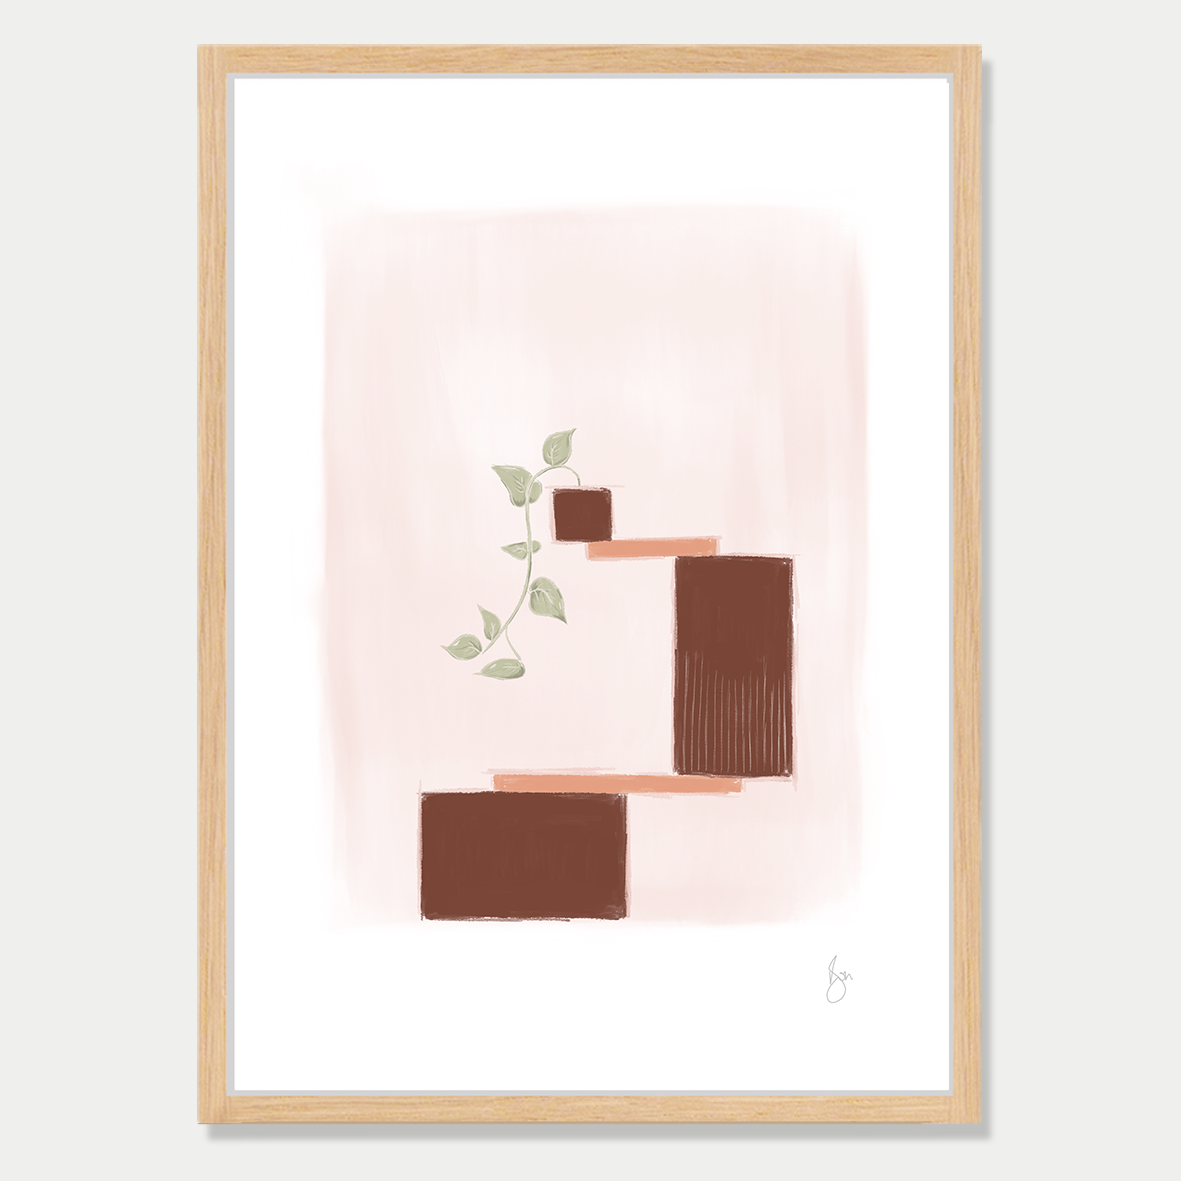 Art print of several blocks balancing with a single vine growing from the top block, in a soft autumn colour palette by Bon Jung. Printed in New Zealand by endemicworld and framed in raw oak.